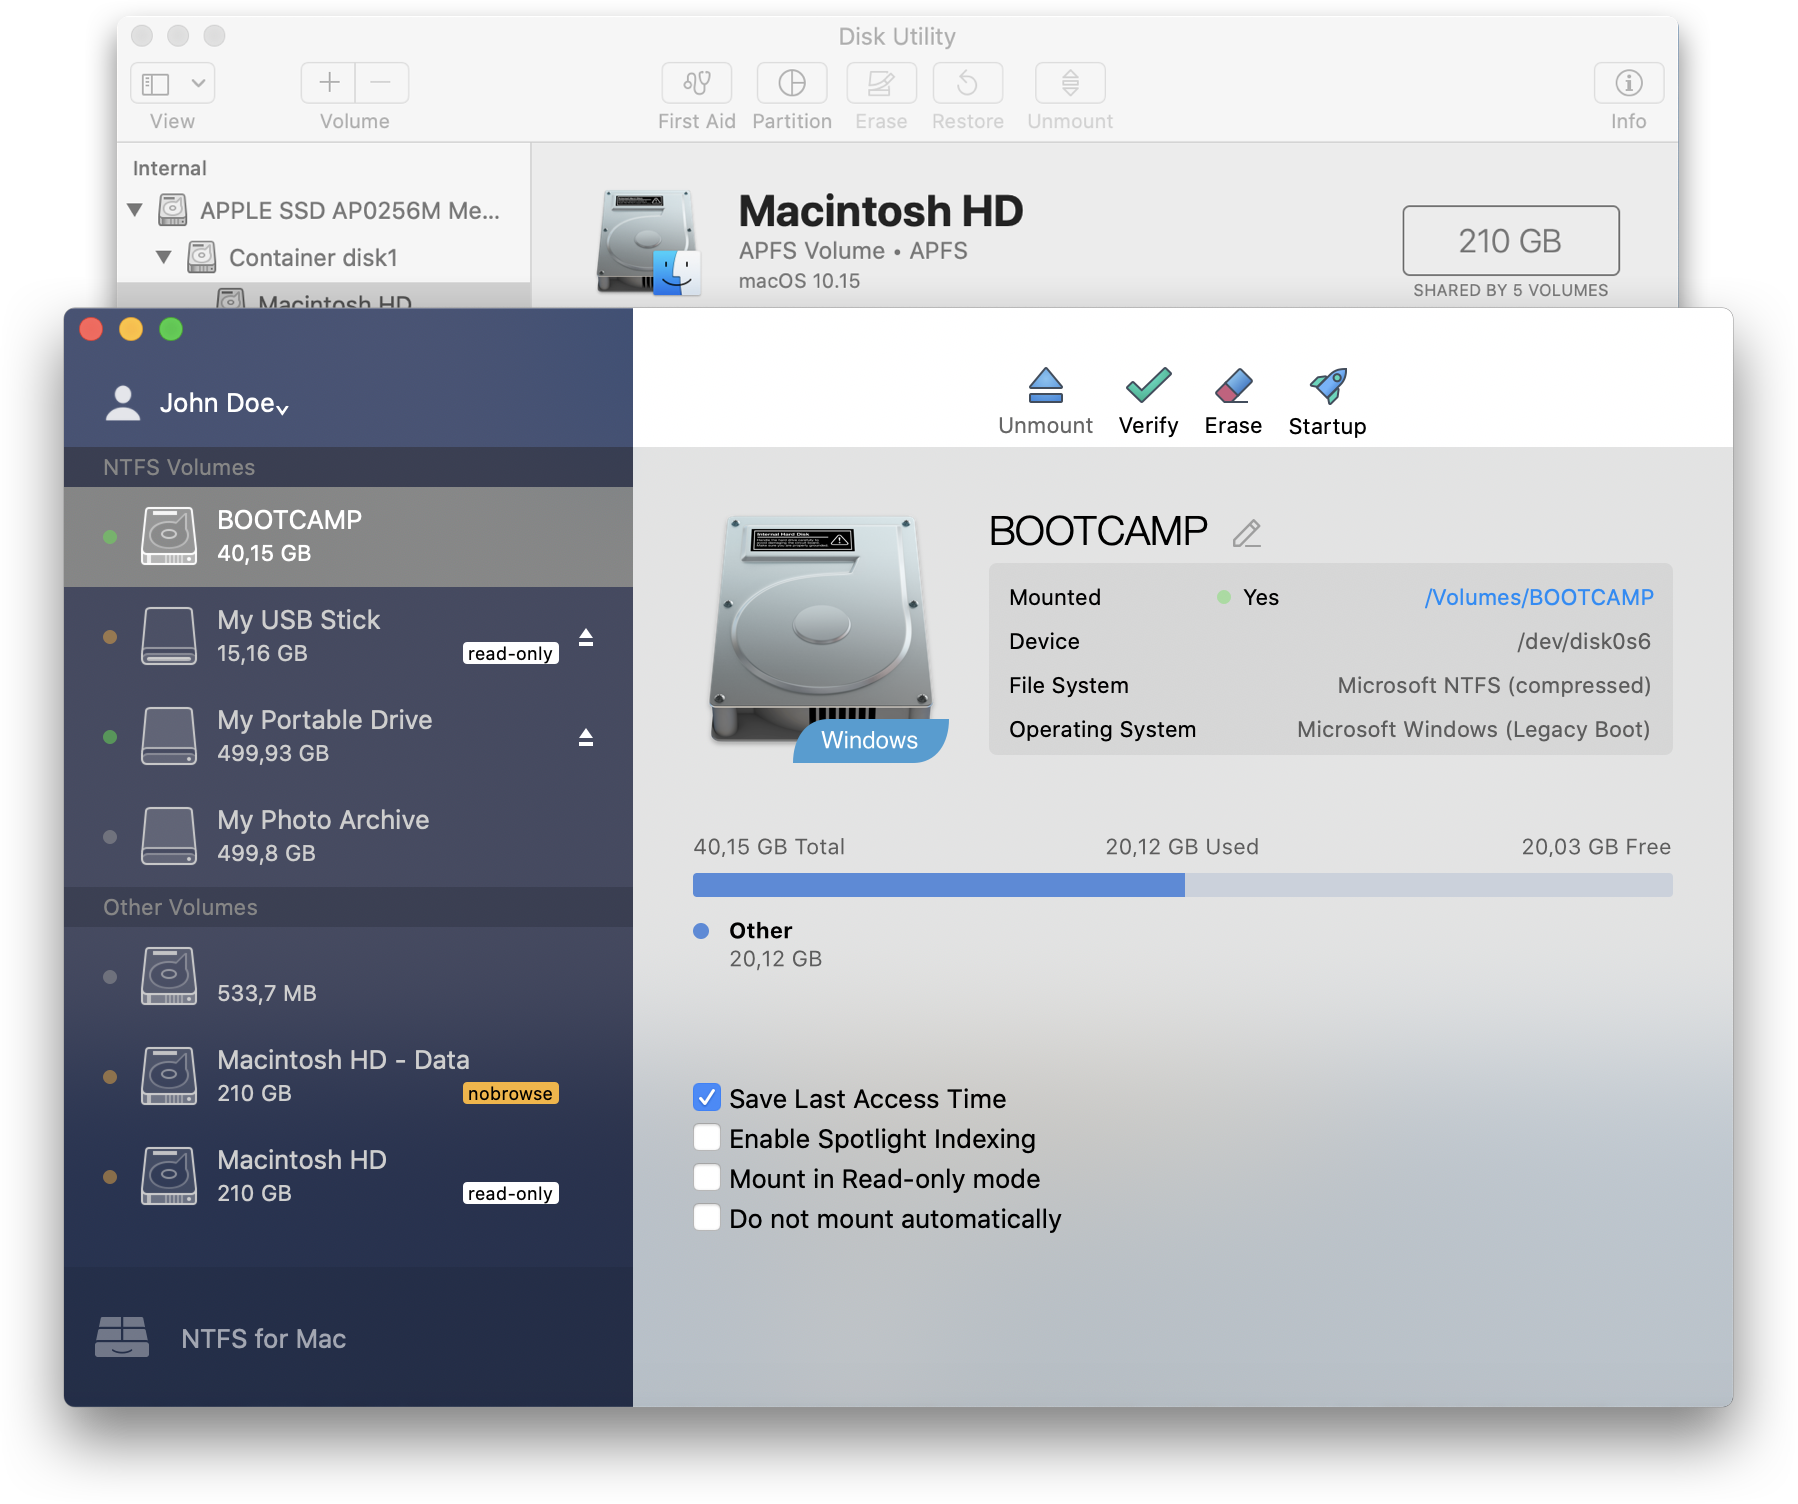 what is paragon ntfs for mac 15